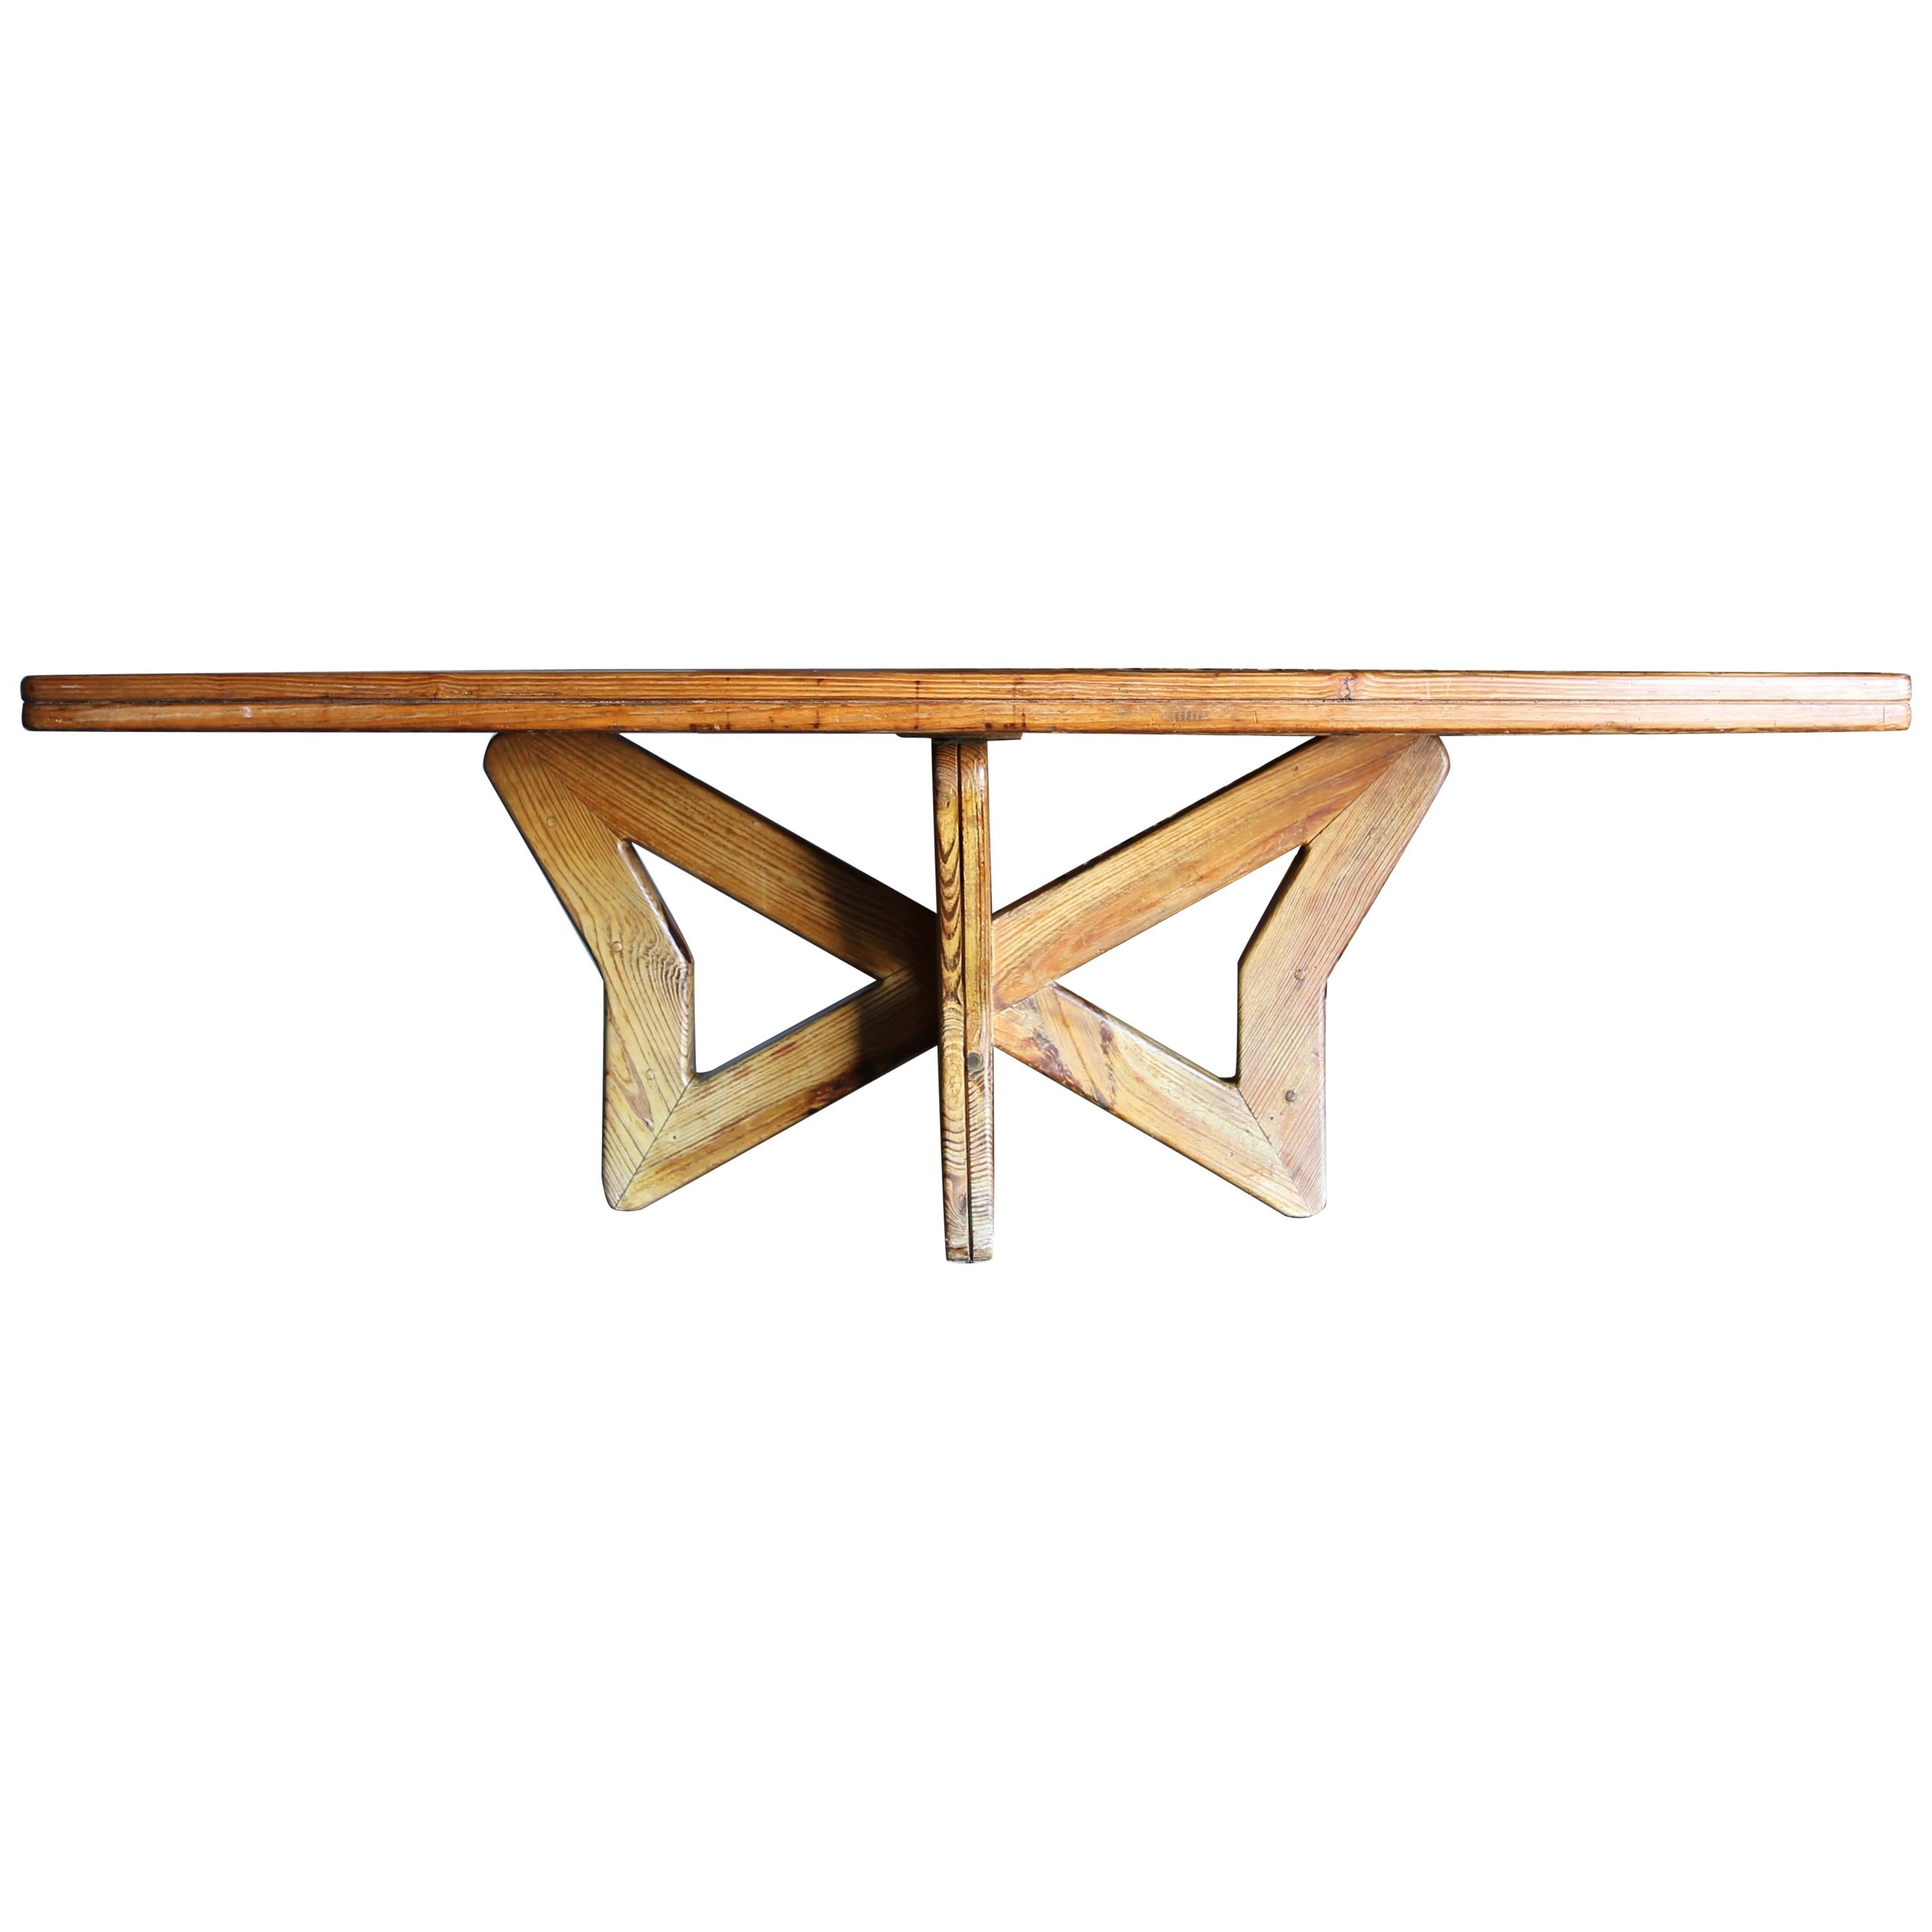 Sculptural Studio Crafted Dining Table, Dominican Republic, circa 1950